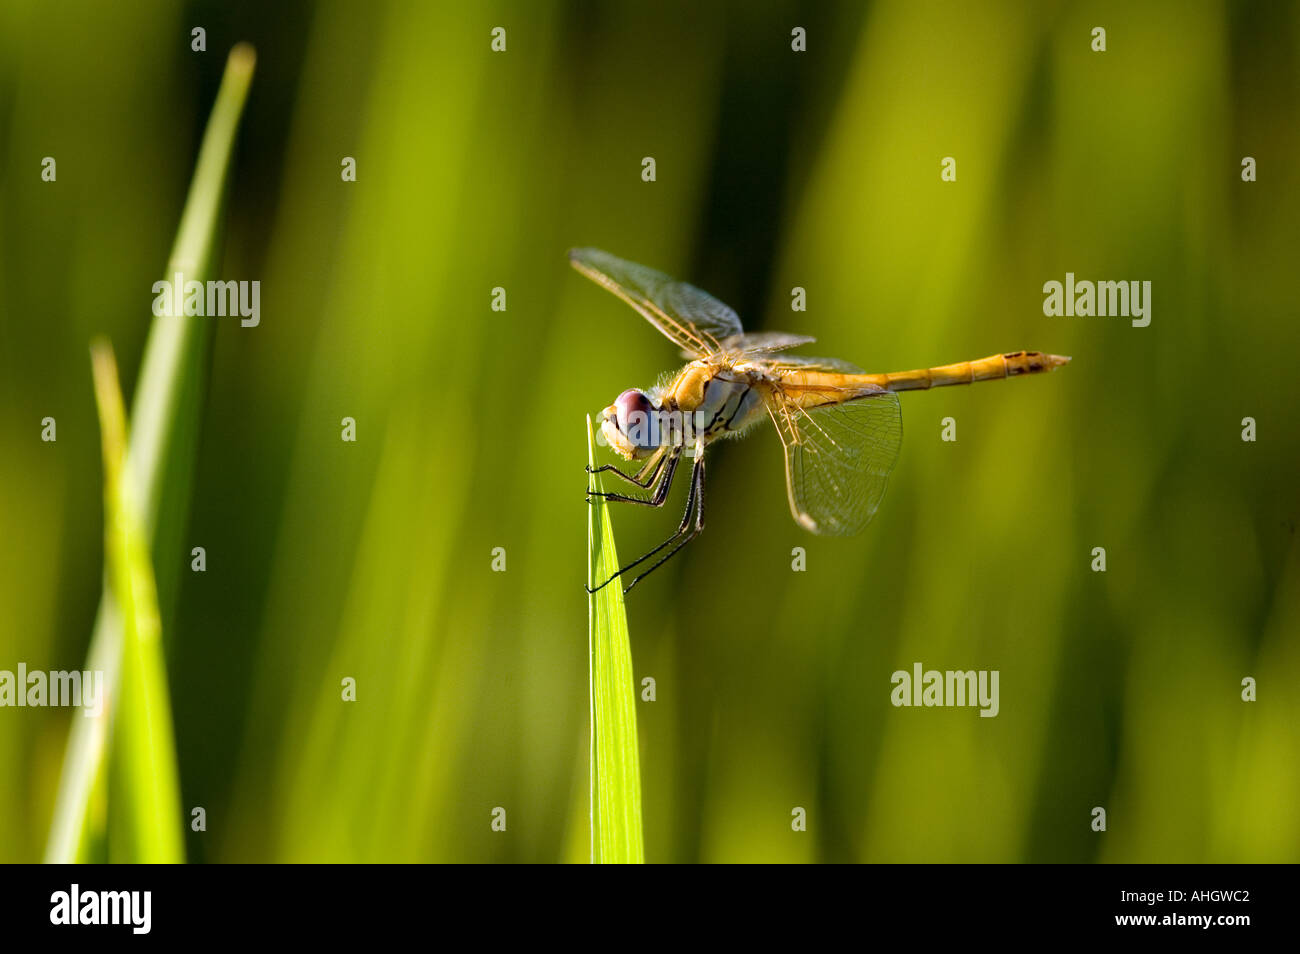 Green dragonfly on a rice blade Stock Photo